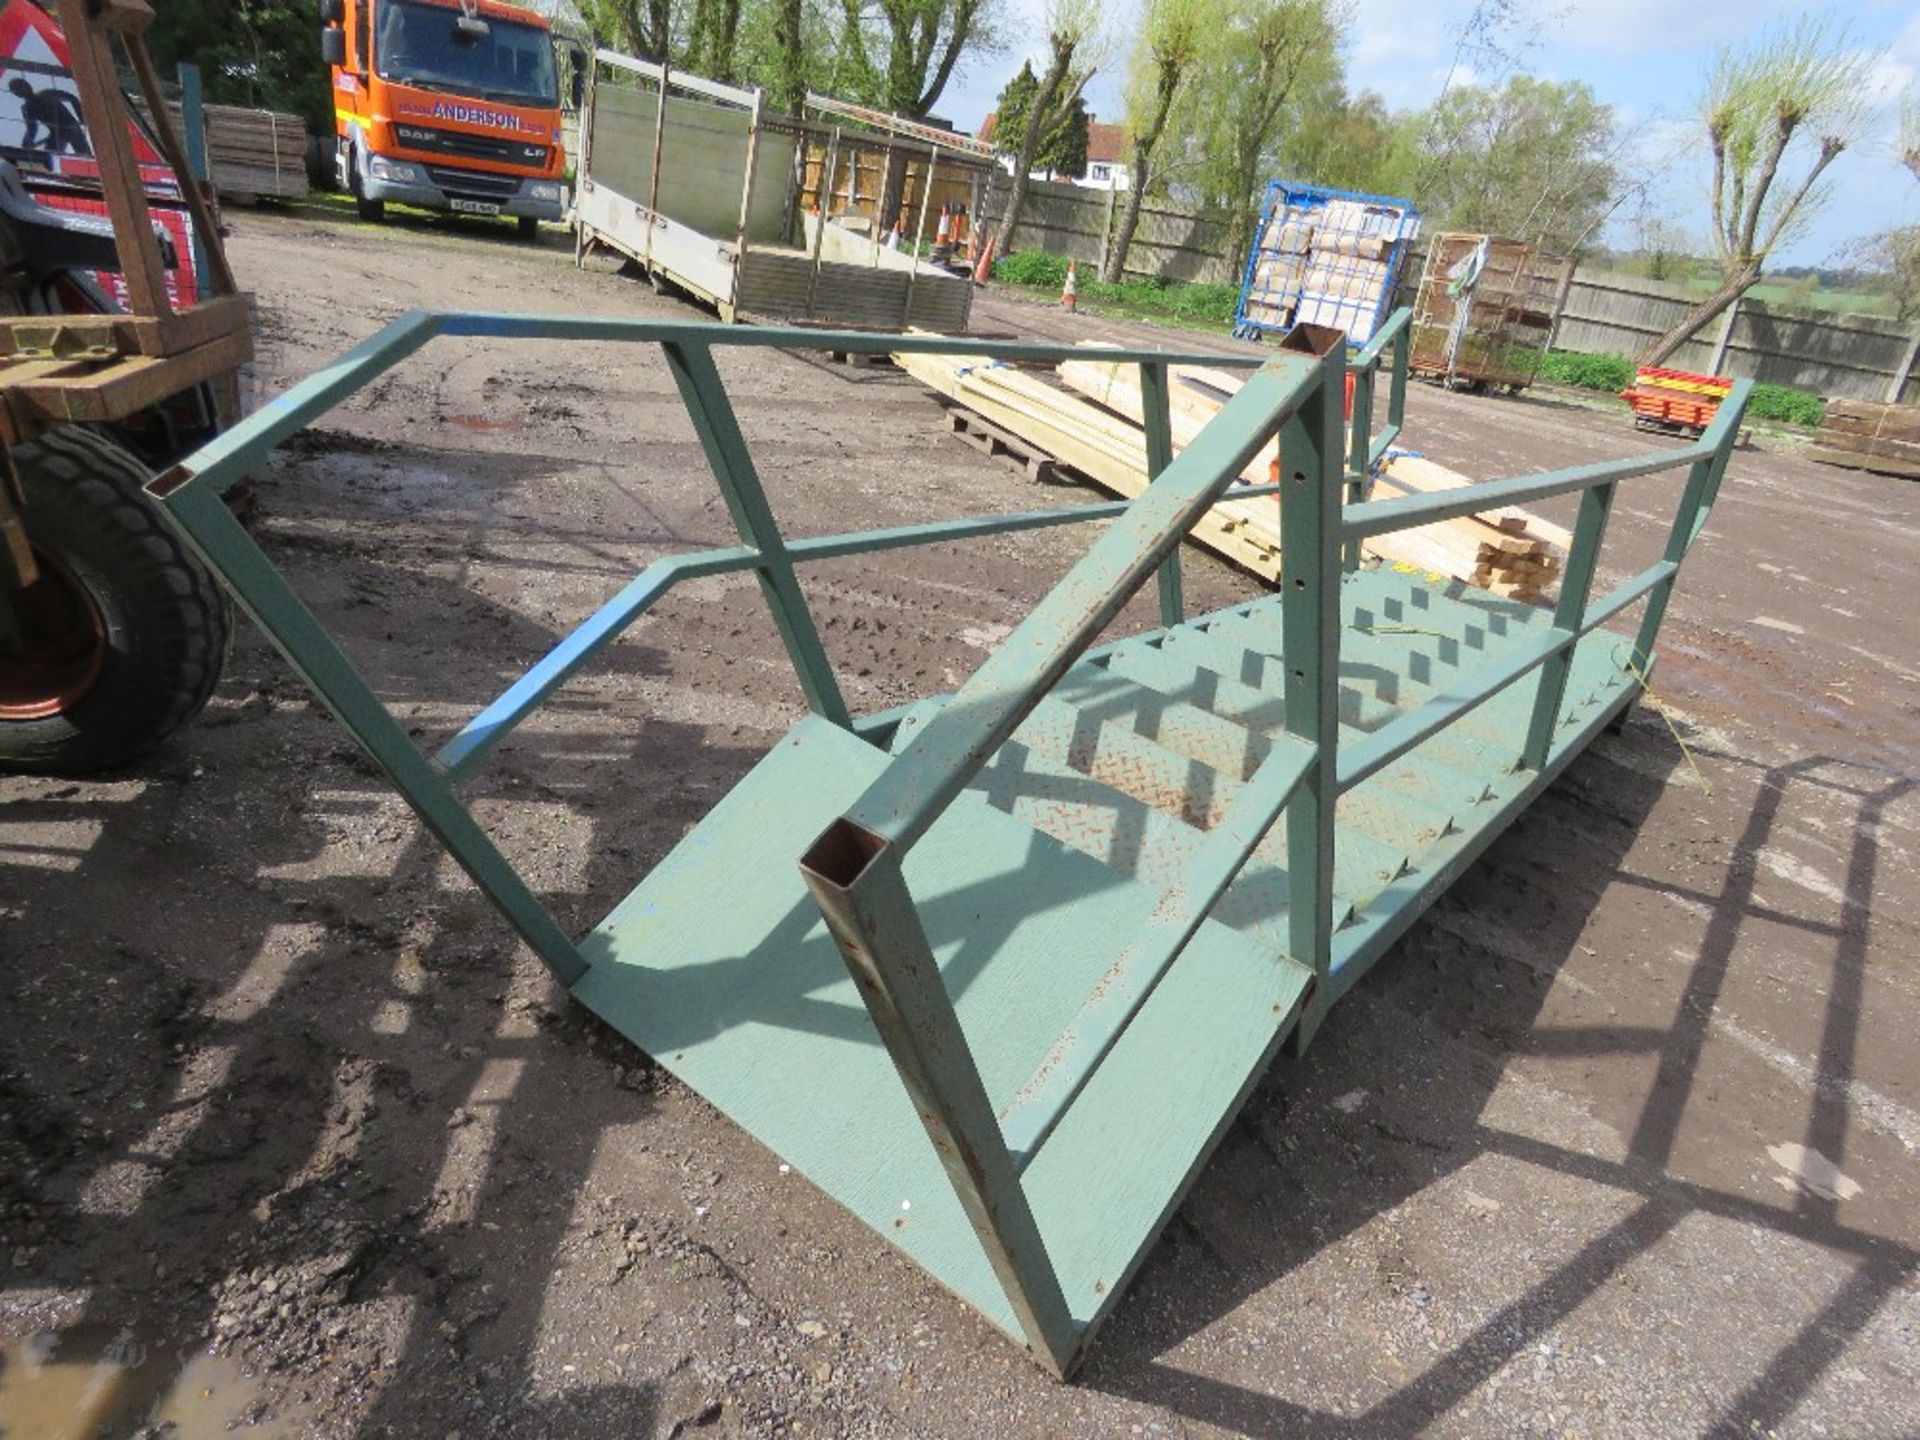 STEEL STAIRCASE FOR ACCESS TO PORTABLE OFFICE ETC. 13FT OVERALL LENGTH APPROX WITH A LANDING. 12 TRE - Image 3 of 4